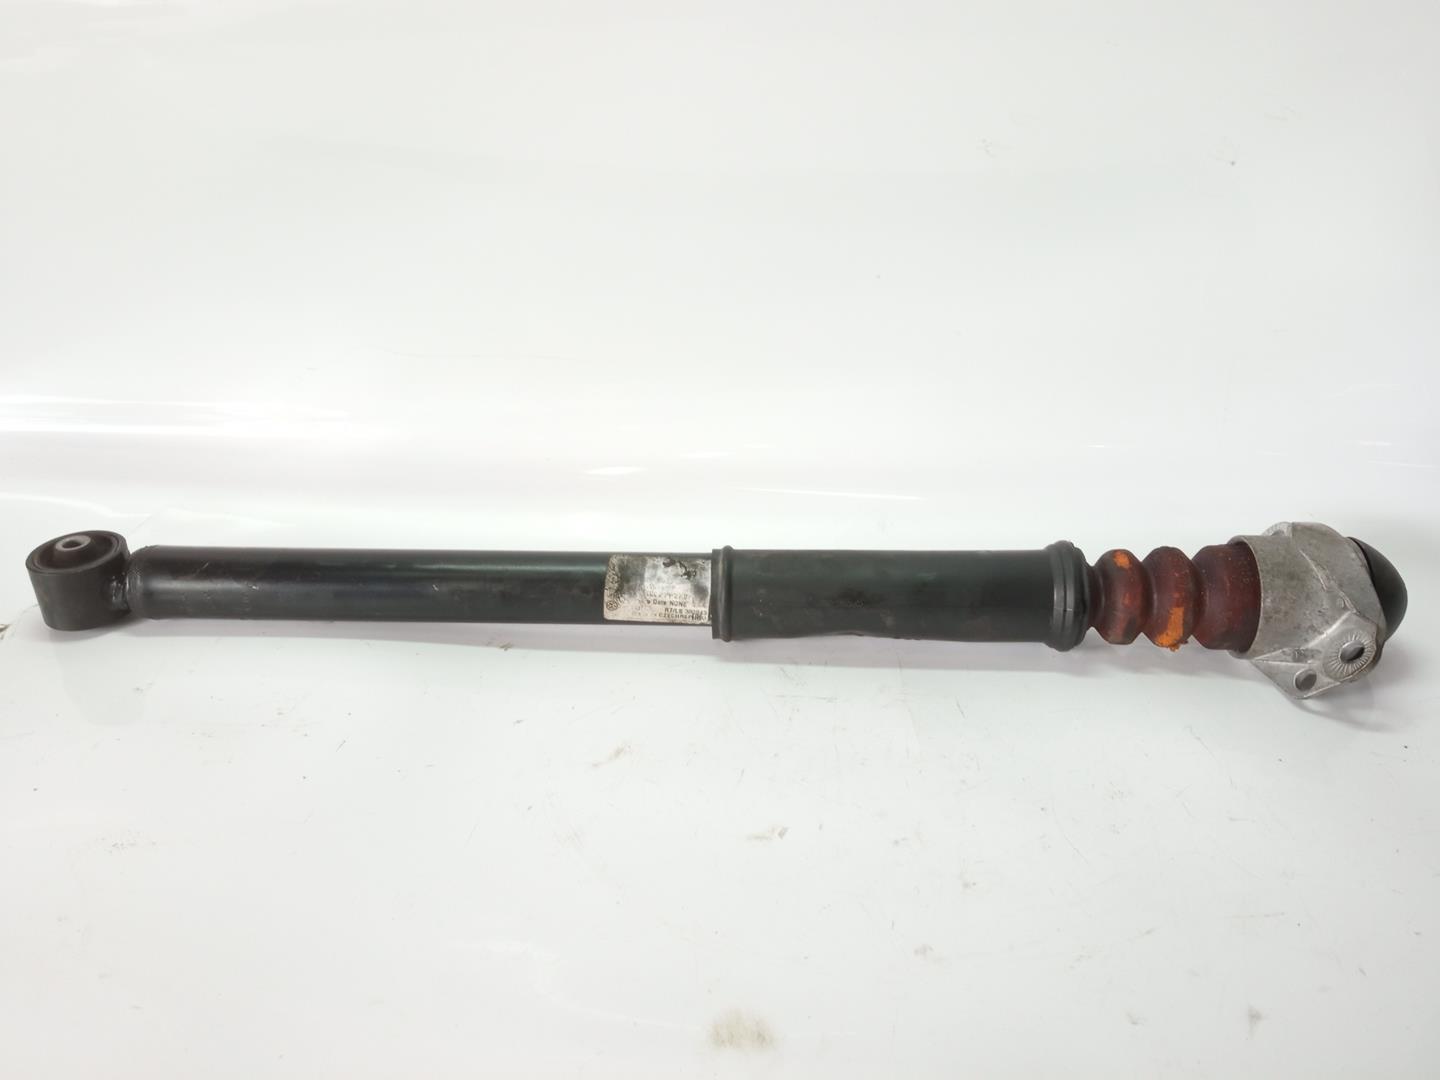 VOLKSWAGEN Polo 4 generation (2001-2009) Rear Right Shock Absorber 6Q0513425, JZW513025E 18473412